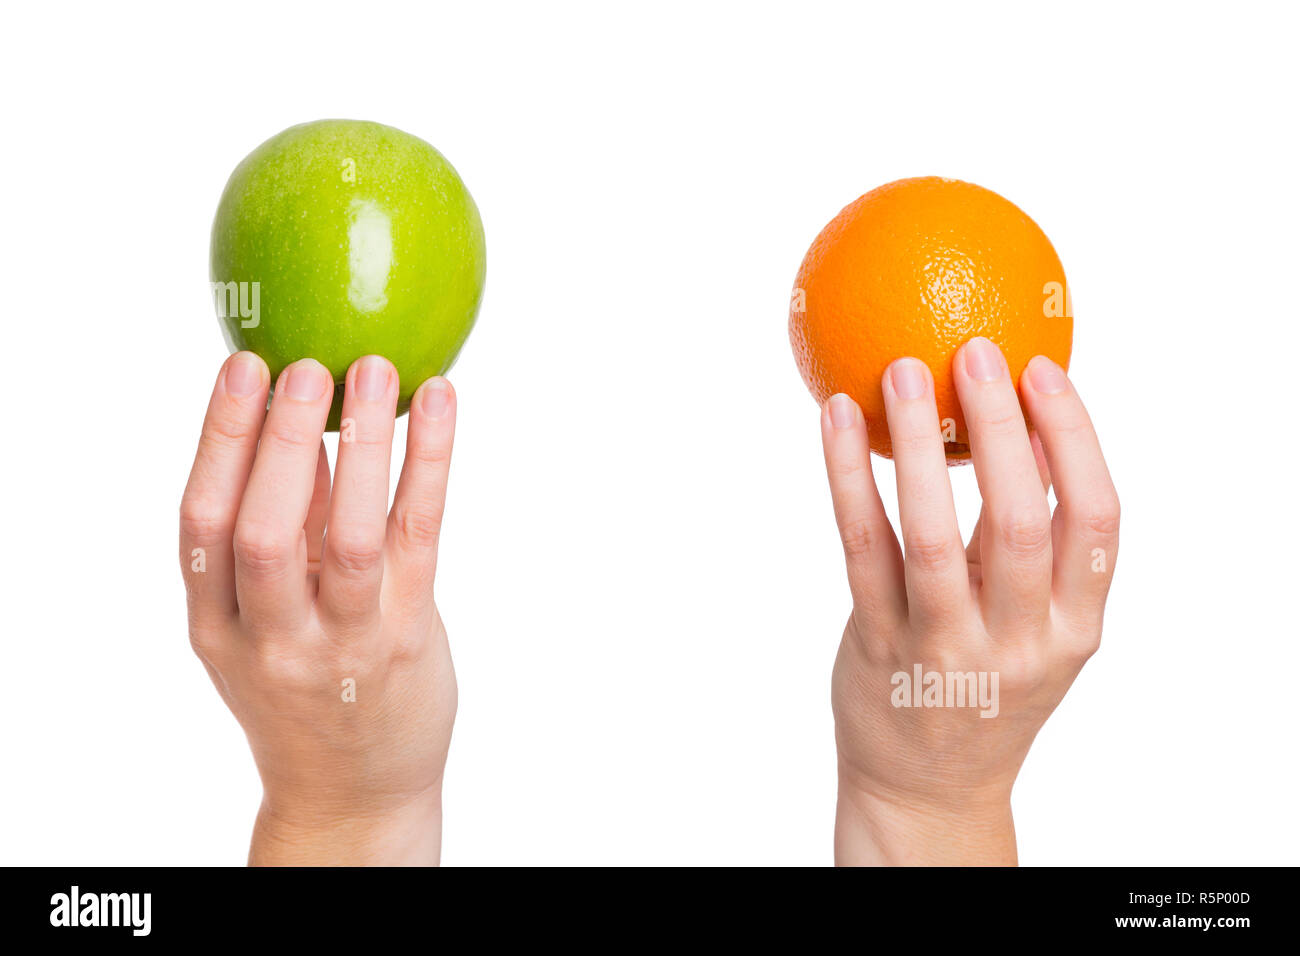 Compare apples with oranges Stock Photo